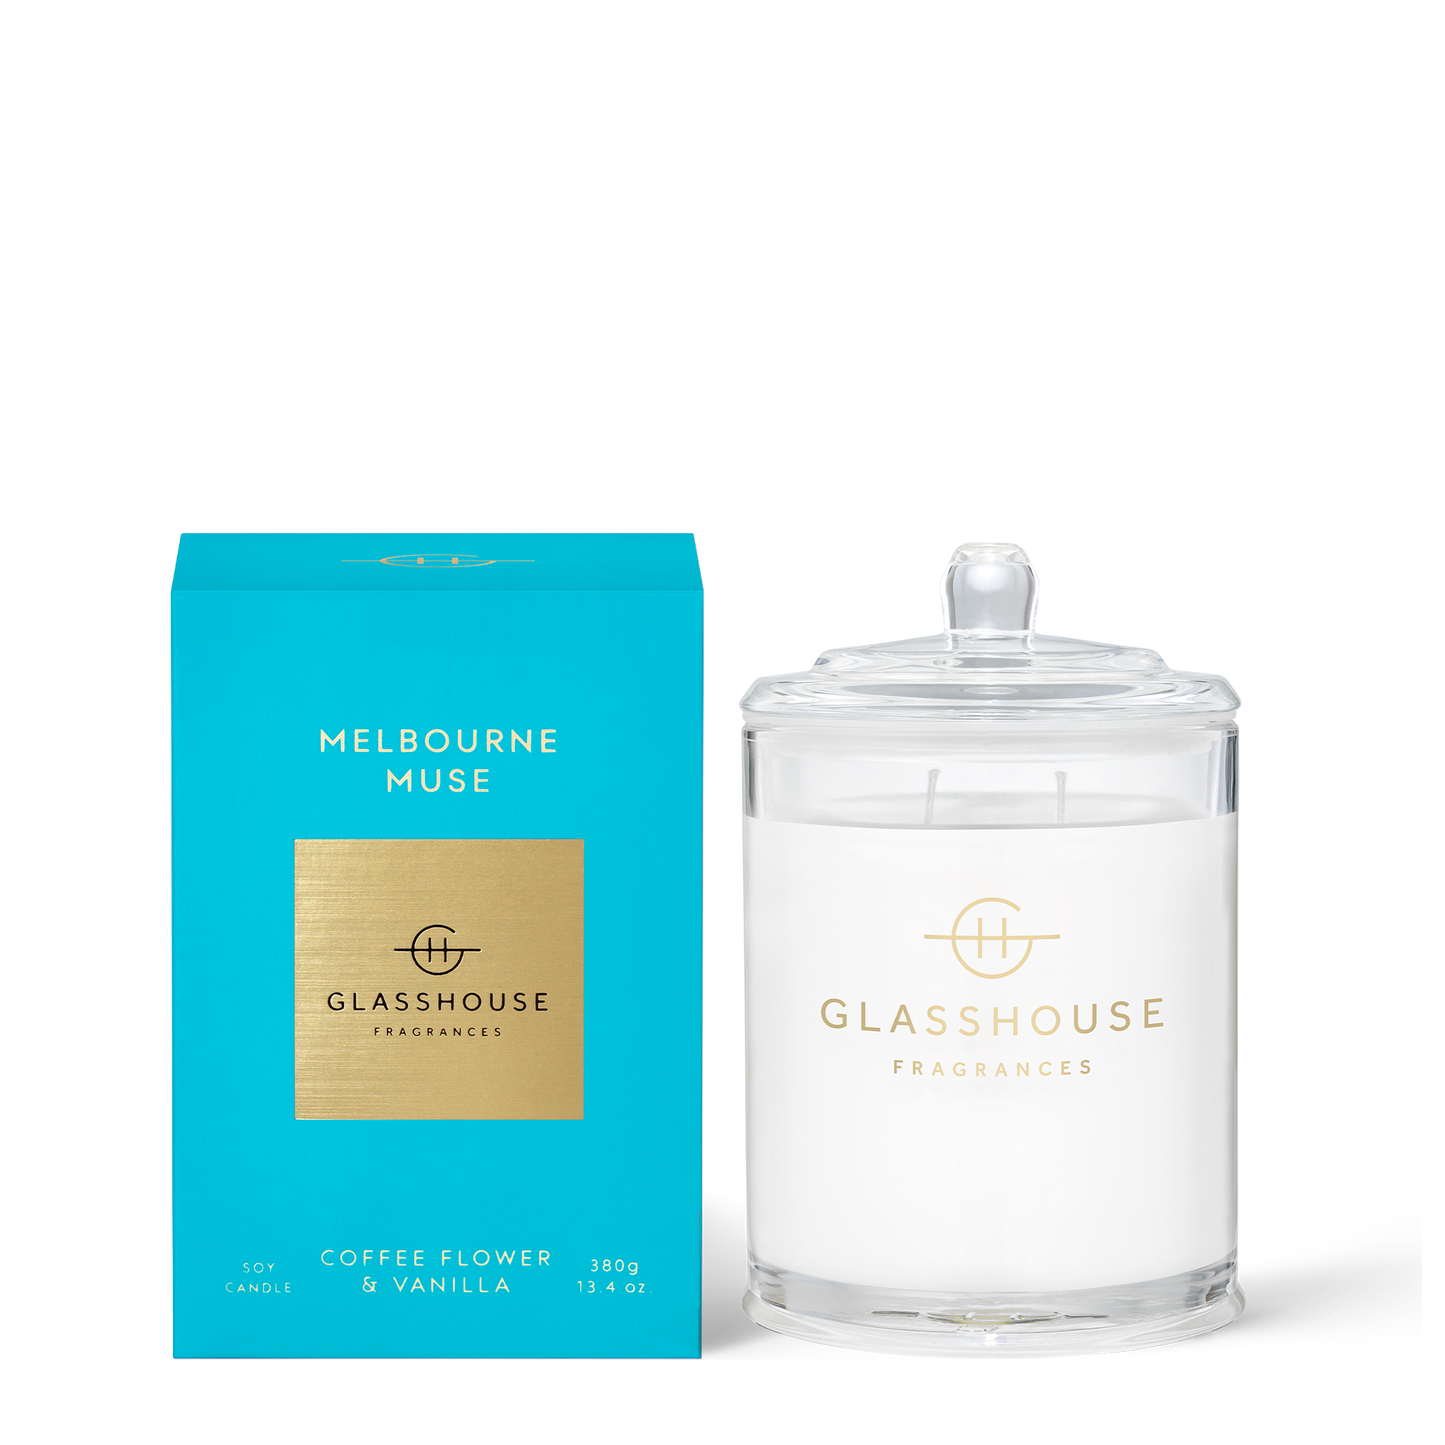 Glasshouse “Melbourne Muse” Soy Candle